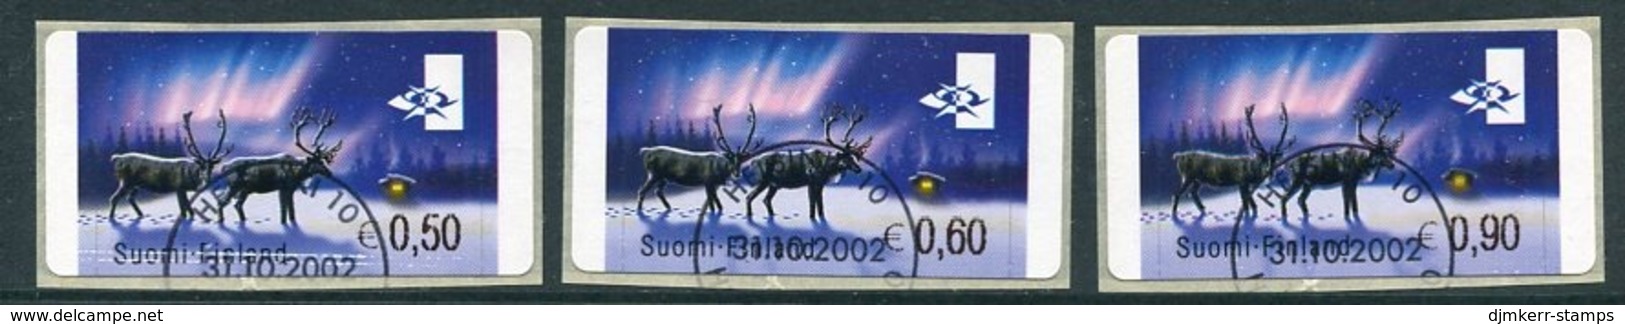 FINLAND 2002 Reindeer ATM, Three Values Used.  Michel 37 - Machine Labels [ATM]